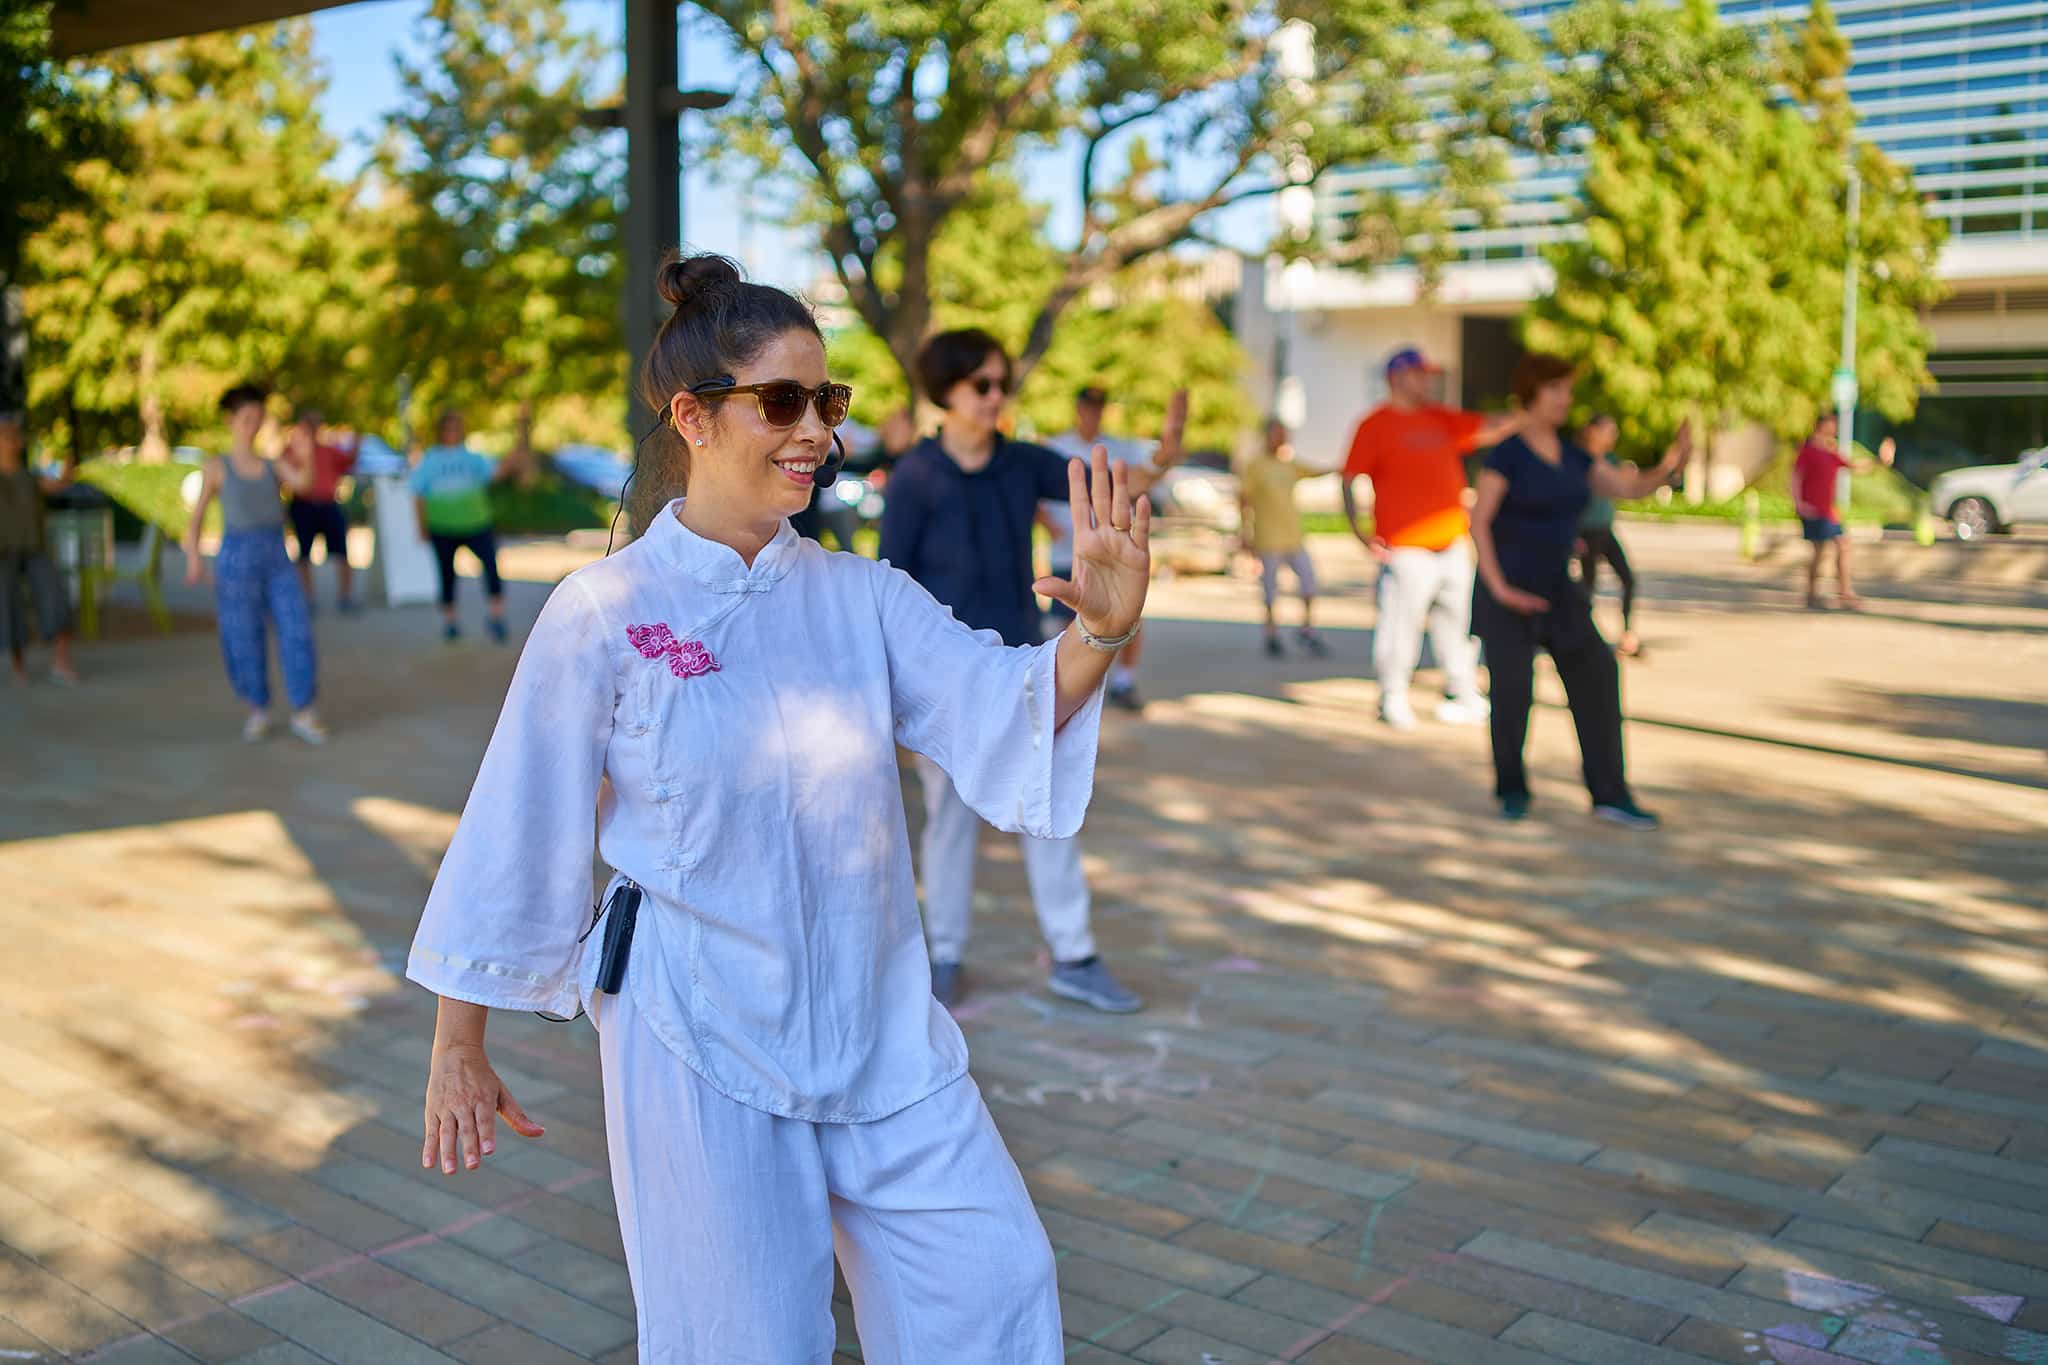 Join us at Levy Park with Taoist Healing for Tai Chi and Meditation every Friday at 9 AM and every Thursday 6 PM.